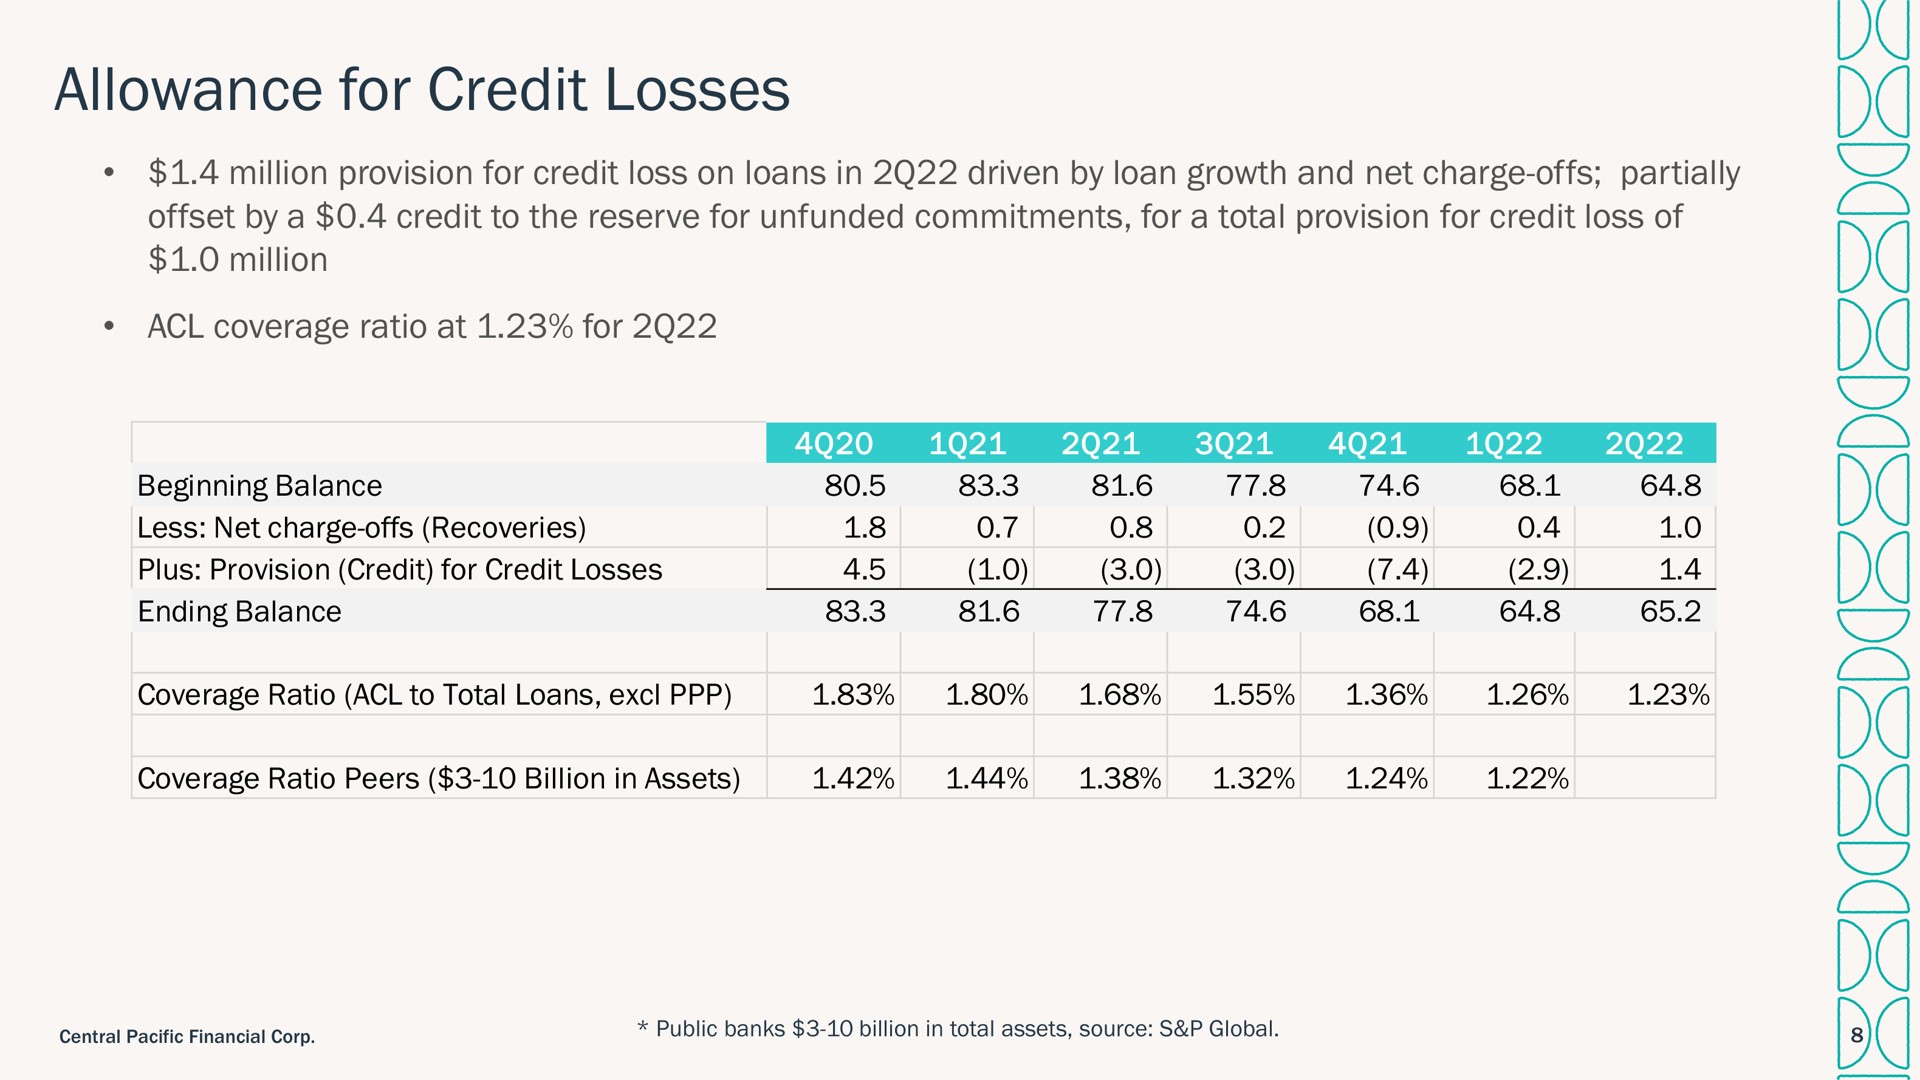 allowance for credit losses | Central Pacific Financial